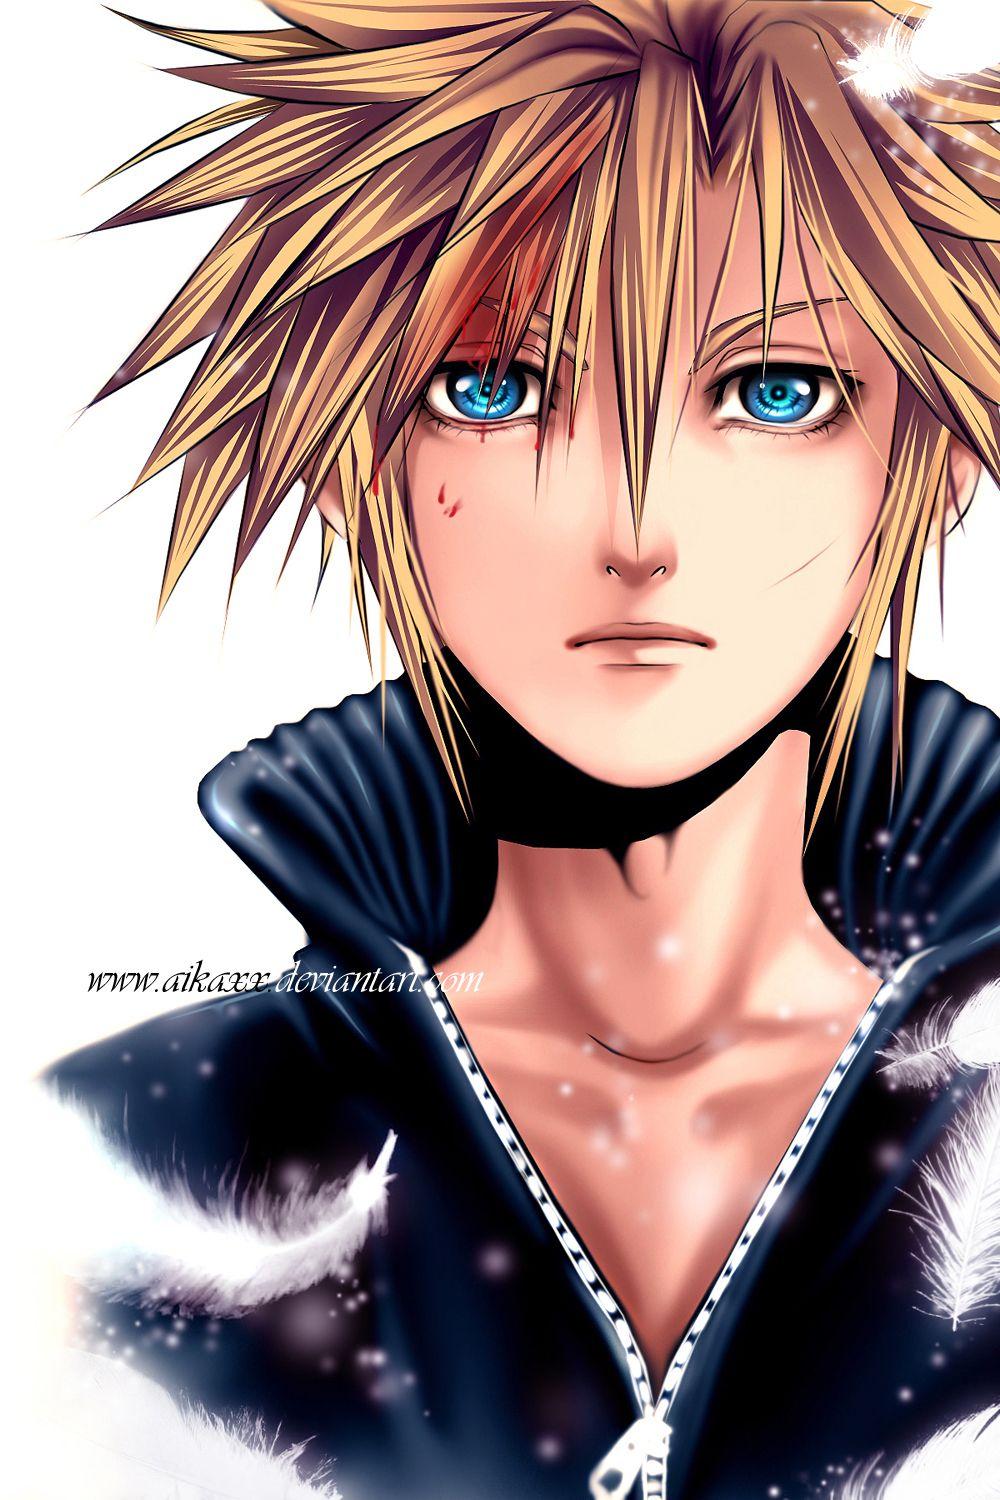 Wallpaper : drawing, video games, anime, Final Fantasy VII, Cloud Strife, Final  Fantasy, Square Enix, sketch, screenshot, 1920x1080 px 1920x1080 -  CoolWallpapers - 714313 - HD Wallpapers - WallHere